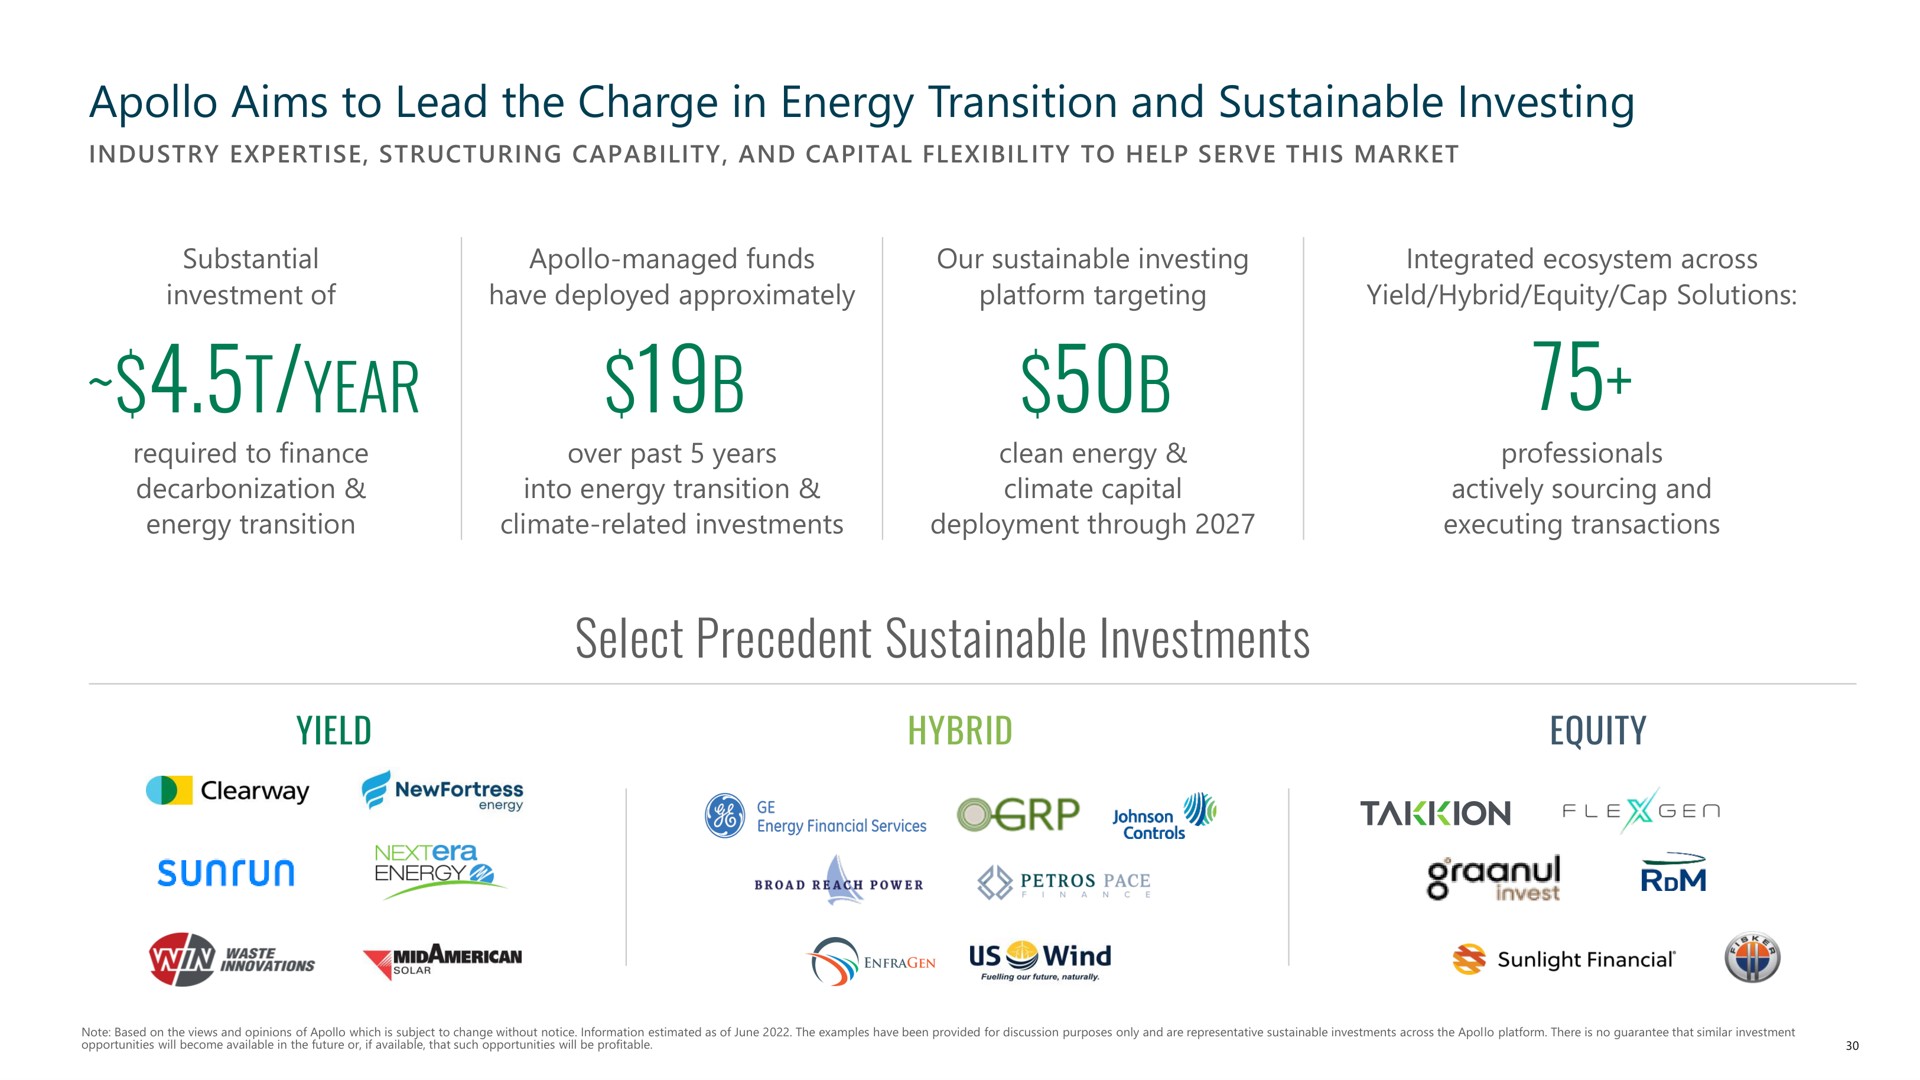 aims to lead the charge in energy transition and sustainable investing year select precedent sustainable investments yield hybrid equity ten | Apollo Global Management